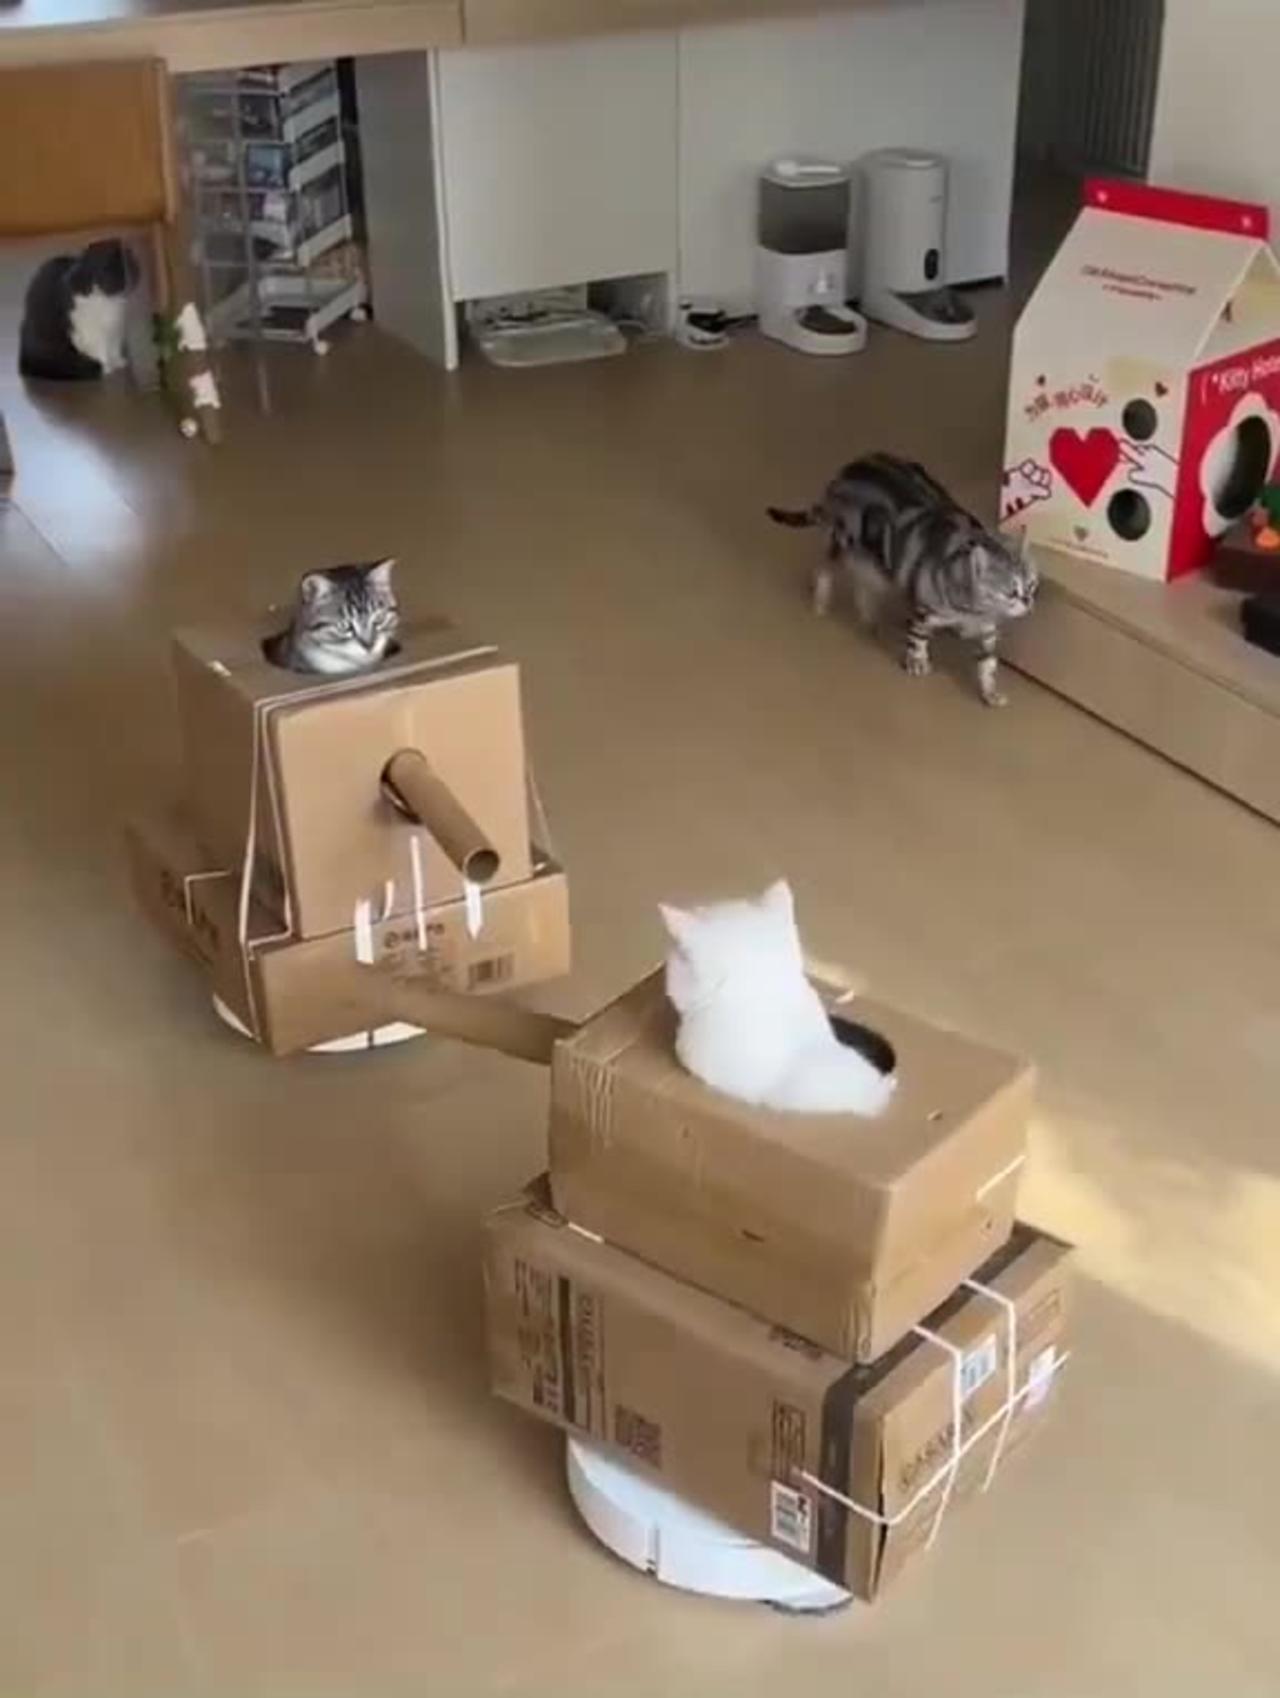 Cats  Getting ready for war in tanks